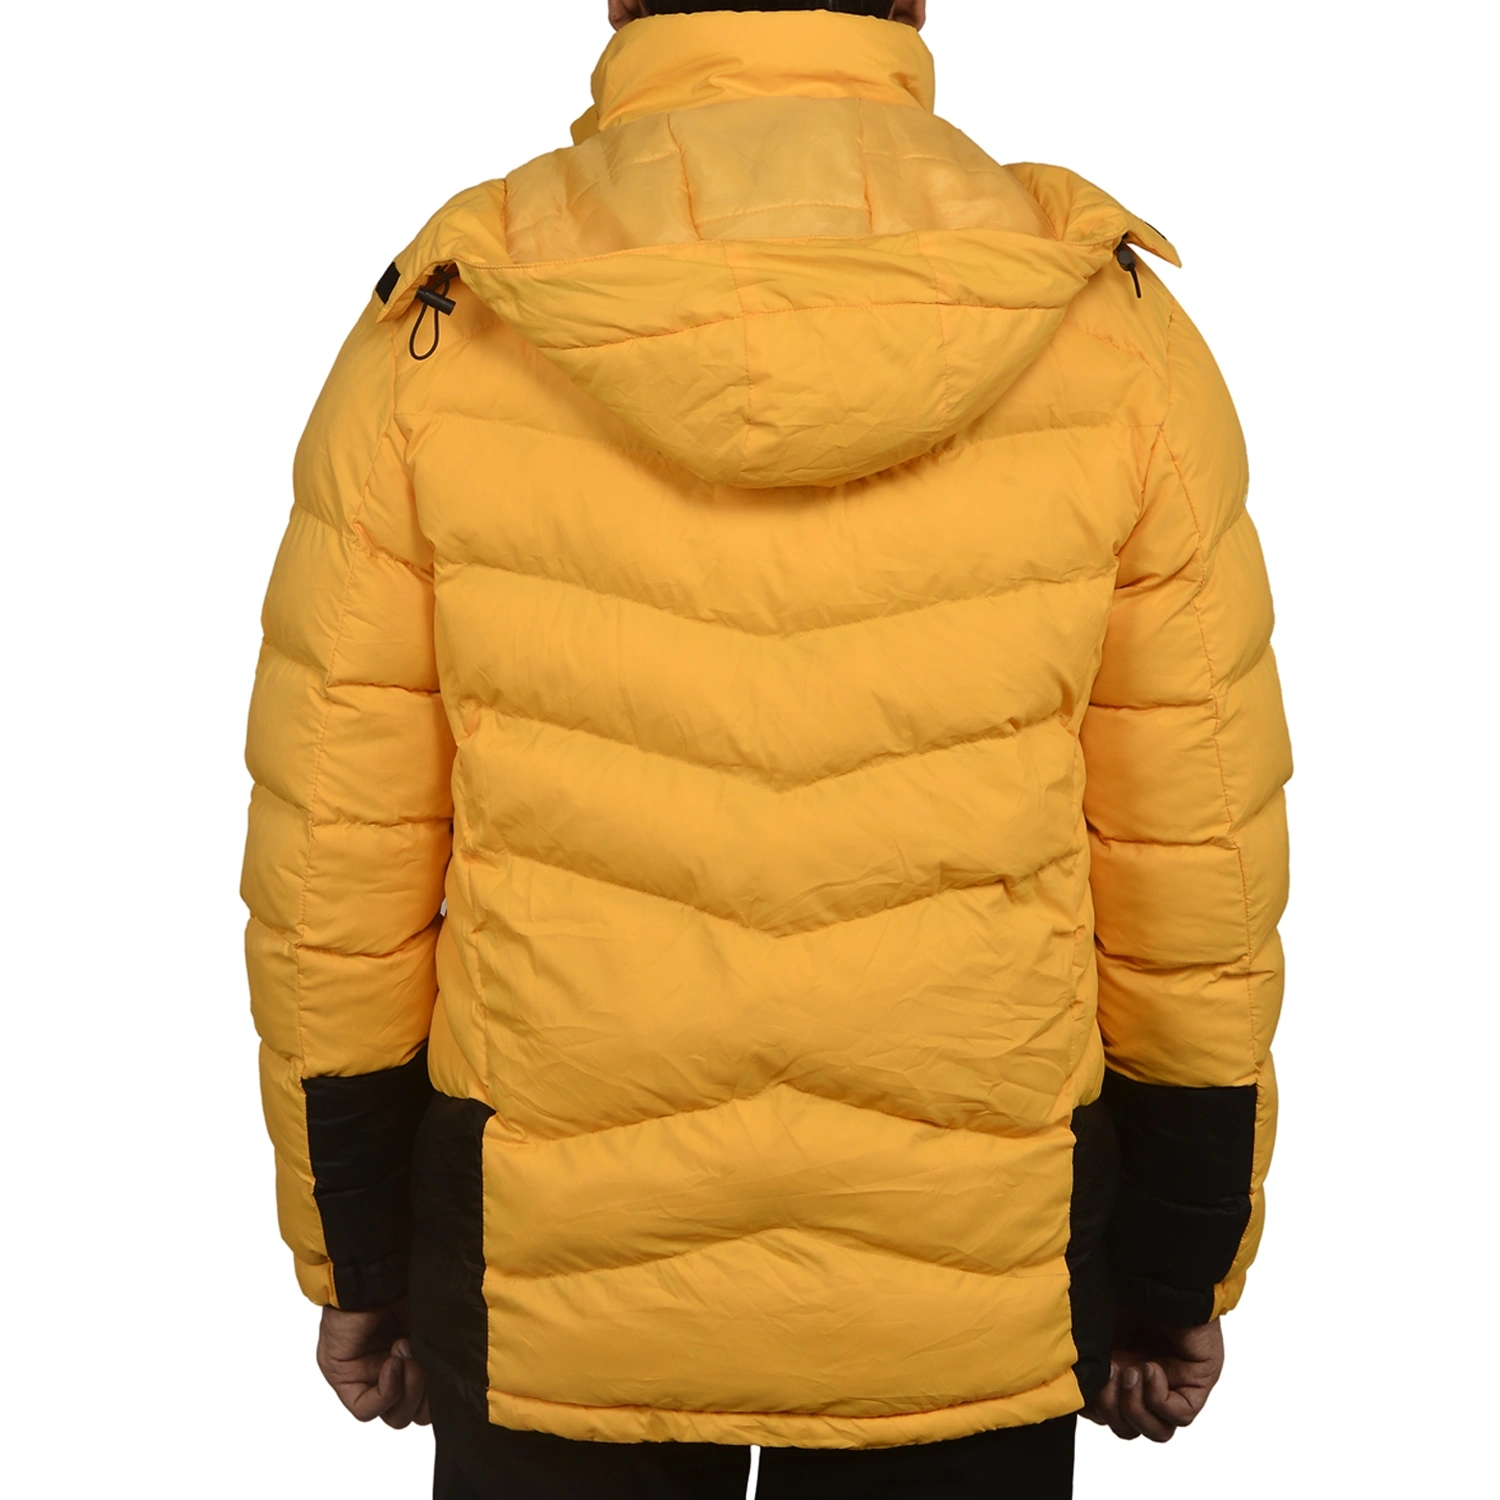 K2 Survivor Down Jacket for Men: Stylized Functionality for Extreme Cold Weather Expeditions (Up to -20°C)-L-Yellow-4